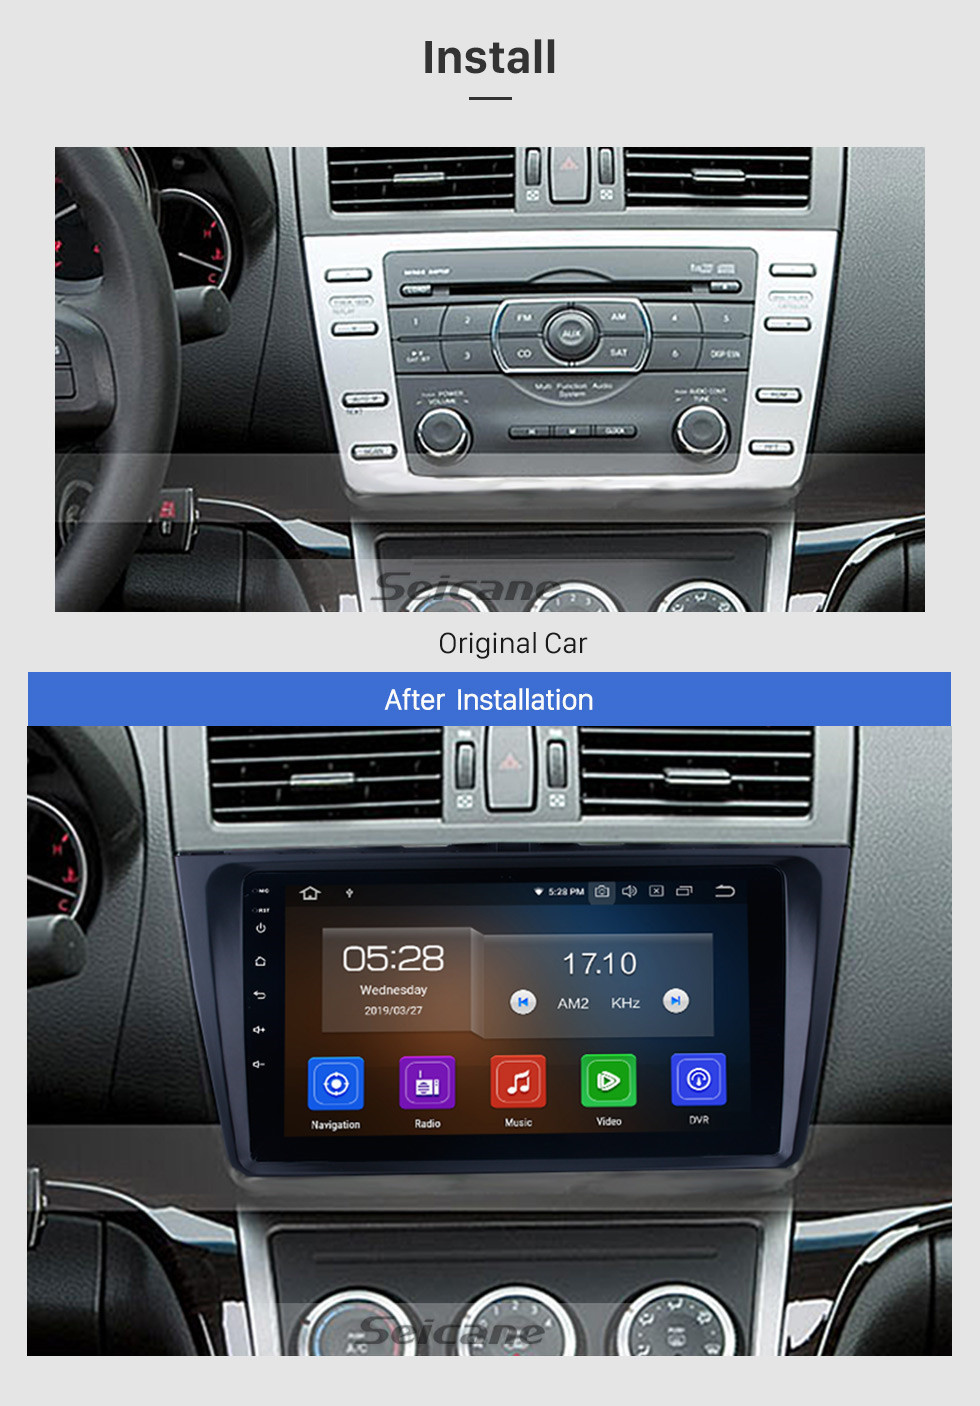 Seicane 9 pouces Radio GPS Navigation Android 11.0 pour MAZDA 6 Ruiyi / Ultra 2008-2015 avec système audio Bluetooth 3G WIFI USB 1080P Mirror Link support OBD2 CD DVD Player